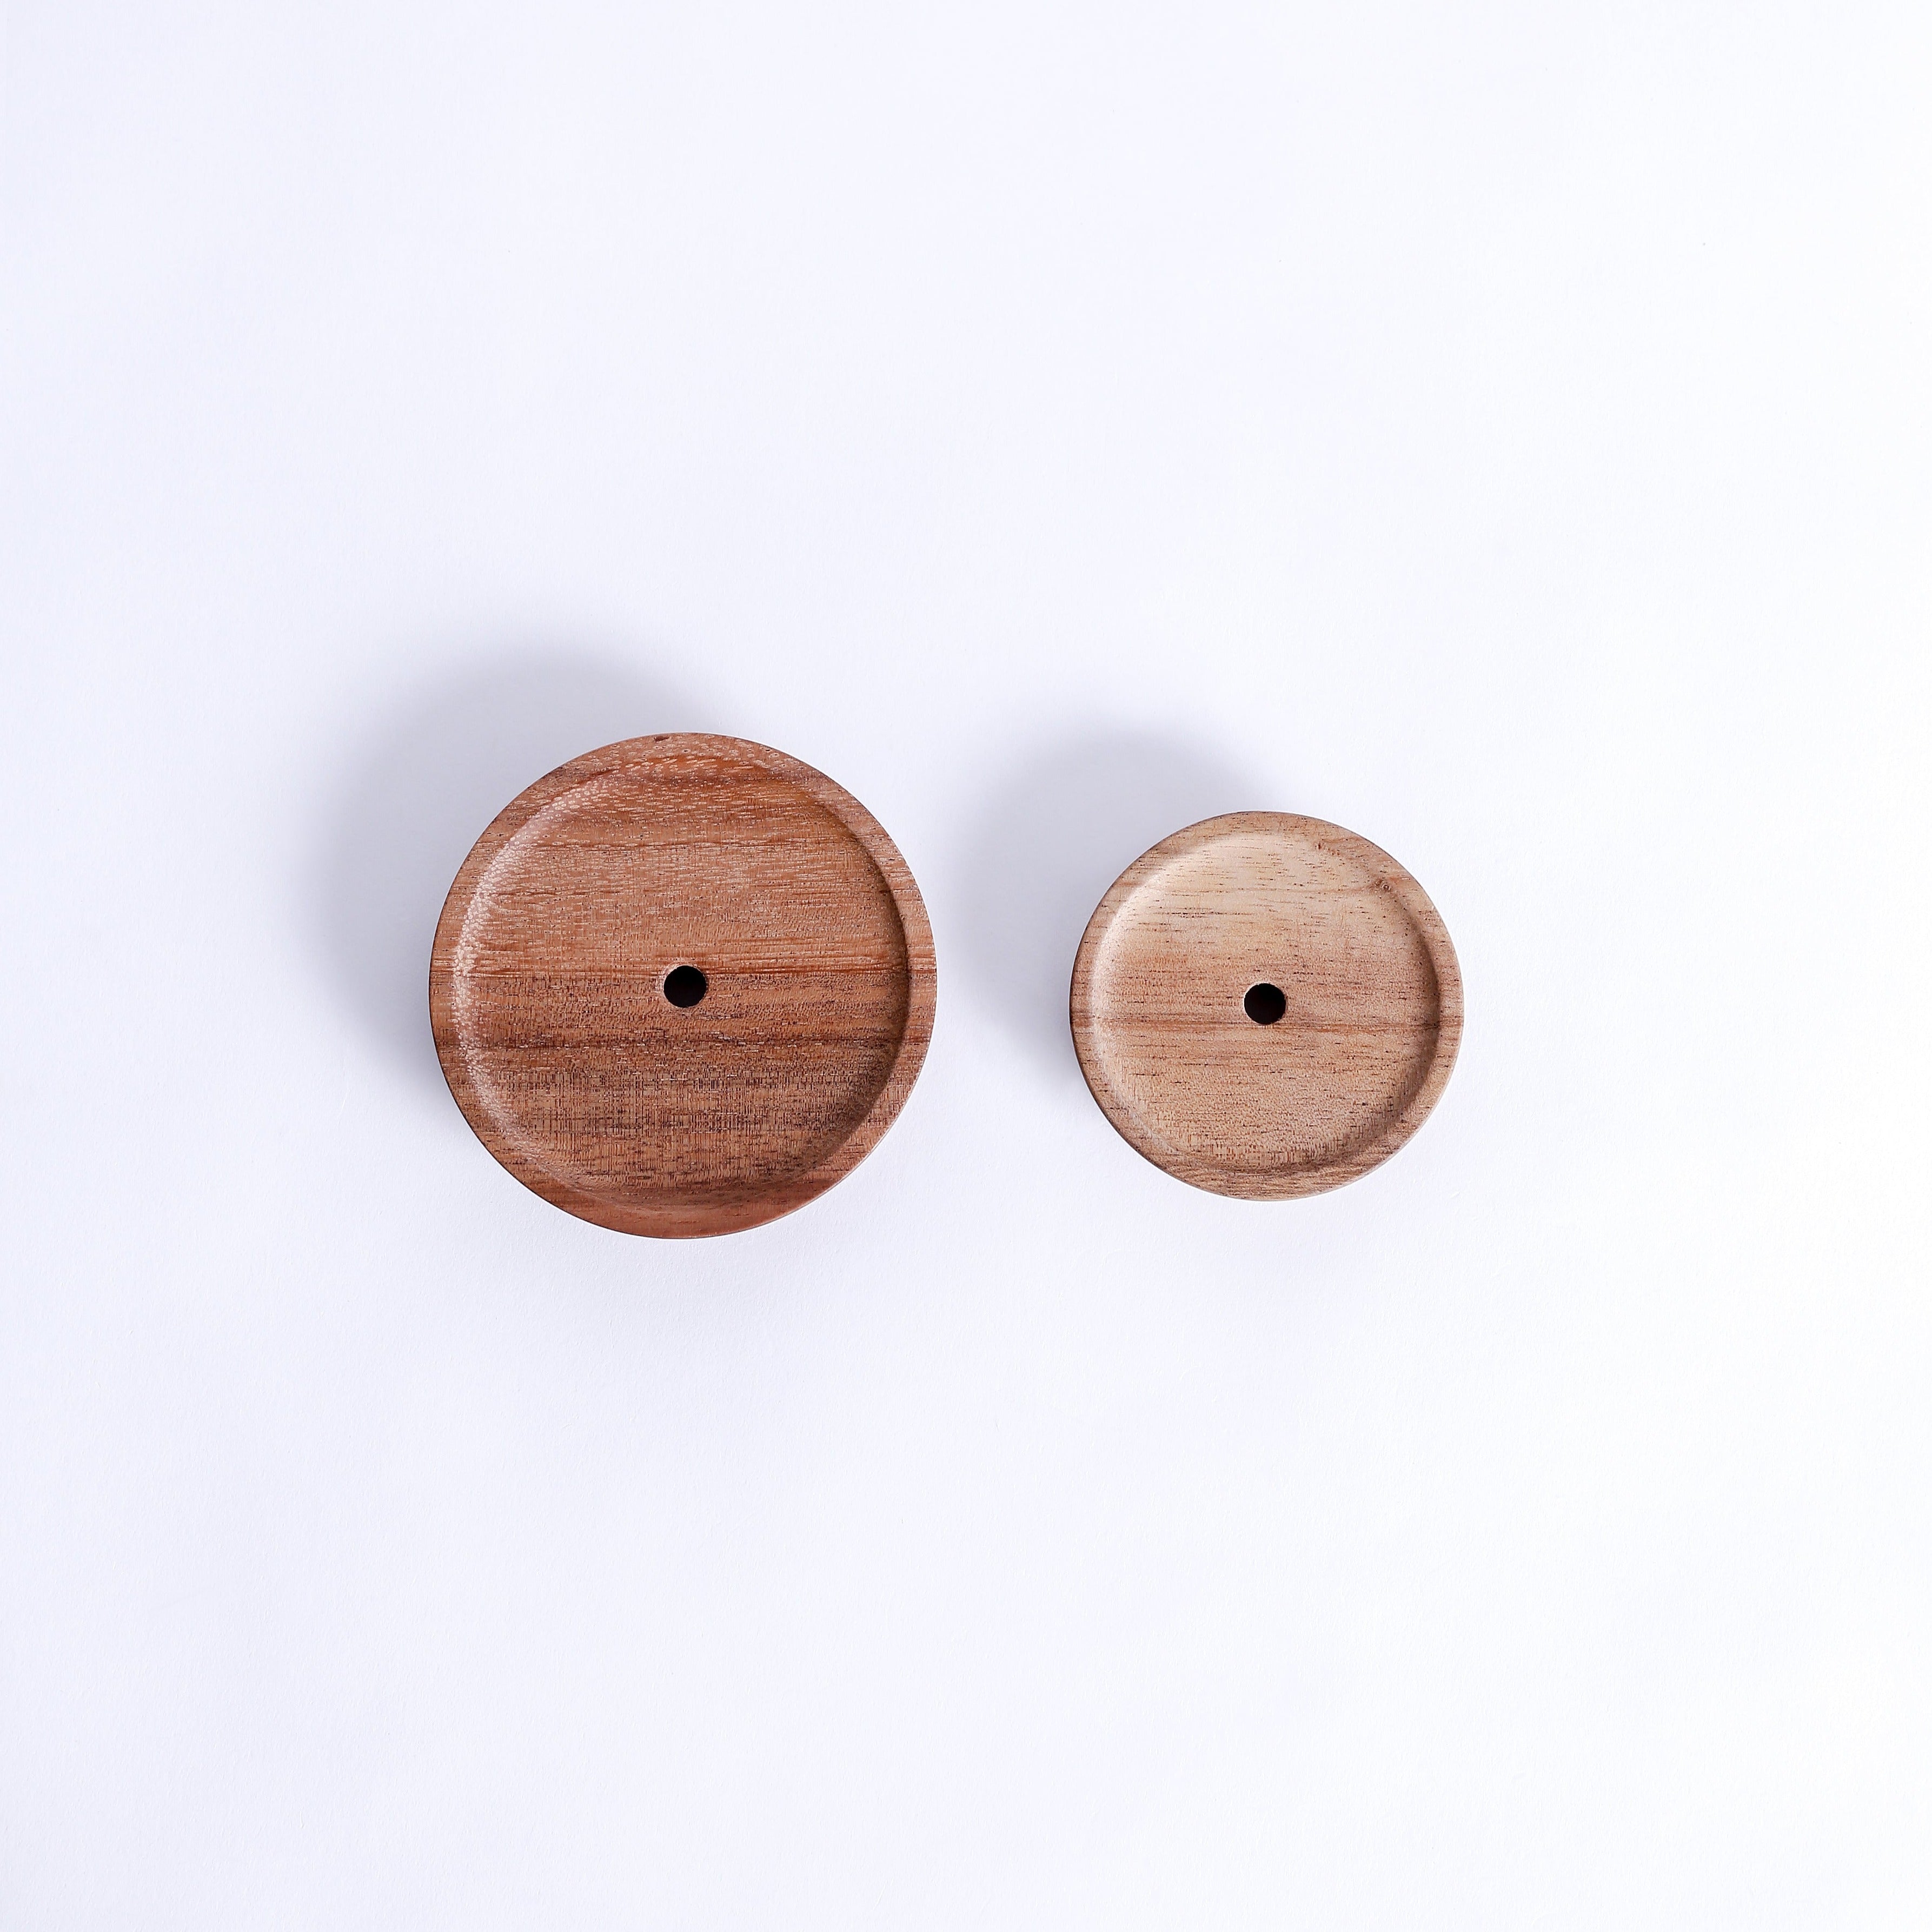 WOODEN LIDS WITH HOLE FOR WECK (M)